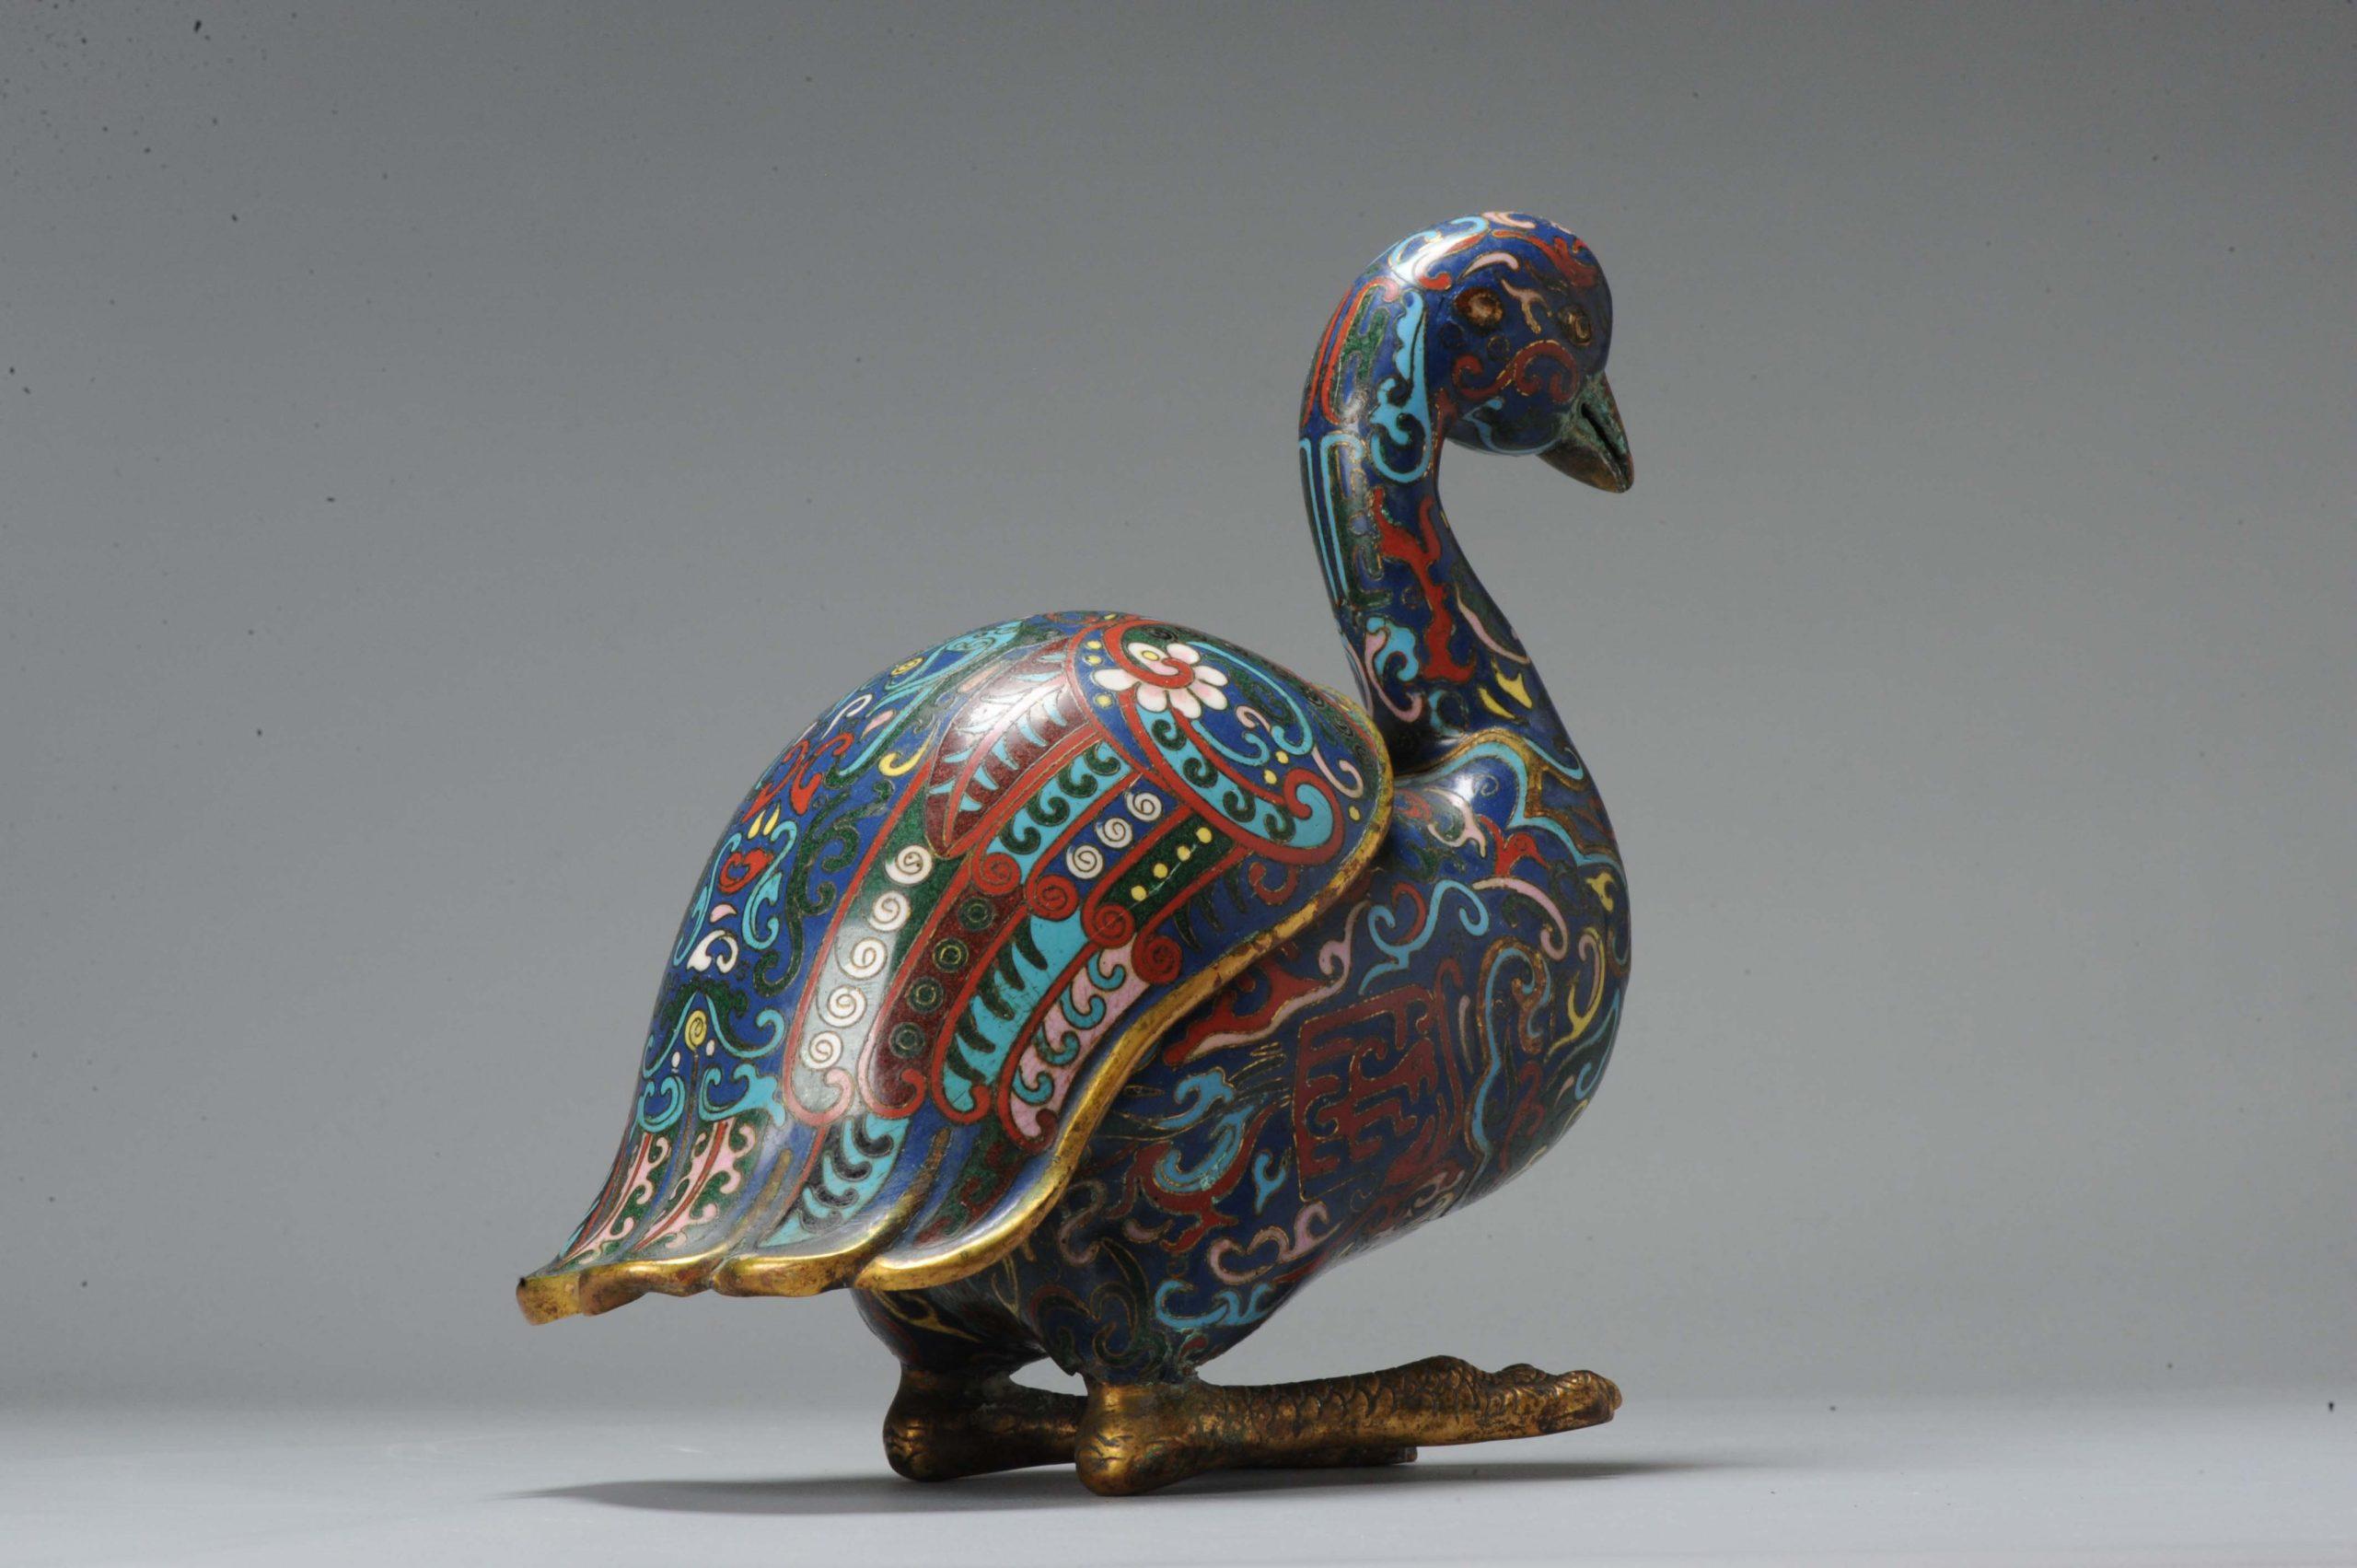 Antique Bronze / Copper Cloisonné Burner Inscense Koro Geese or Swan In Good Condition For Sale In Amsterdam, Noord Holland